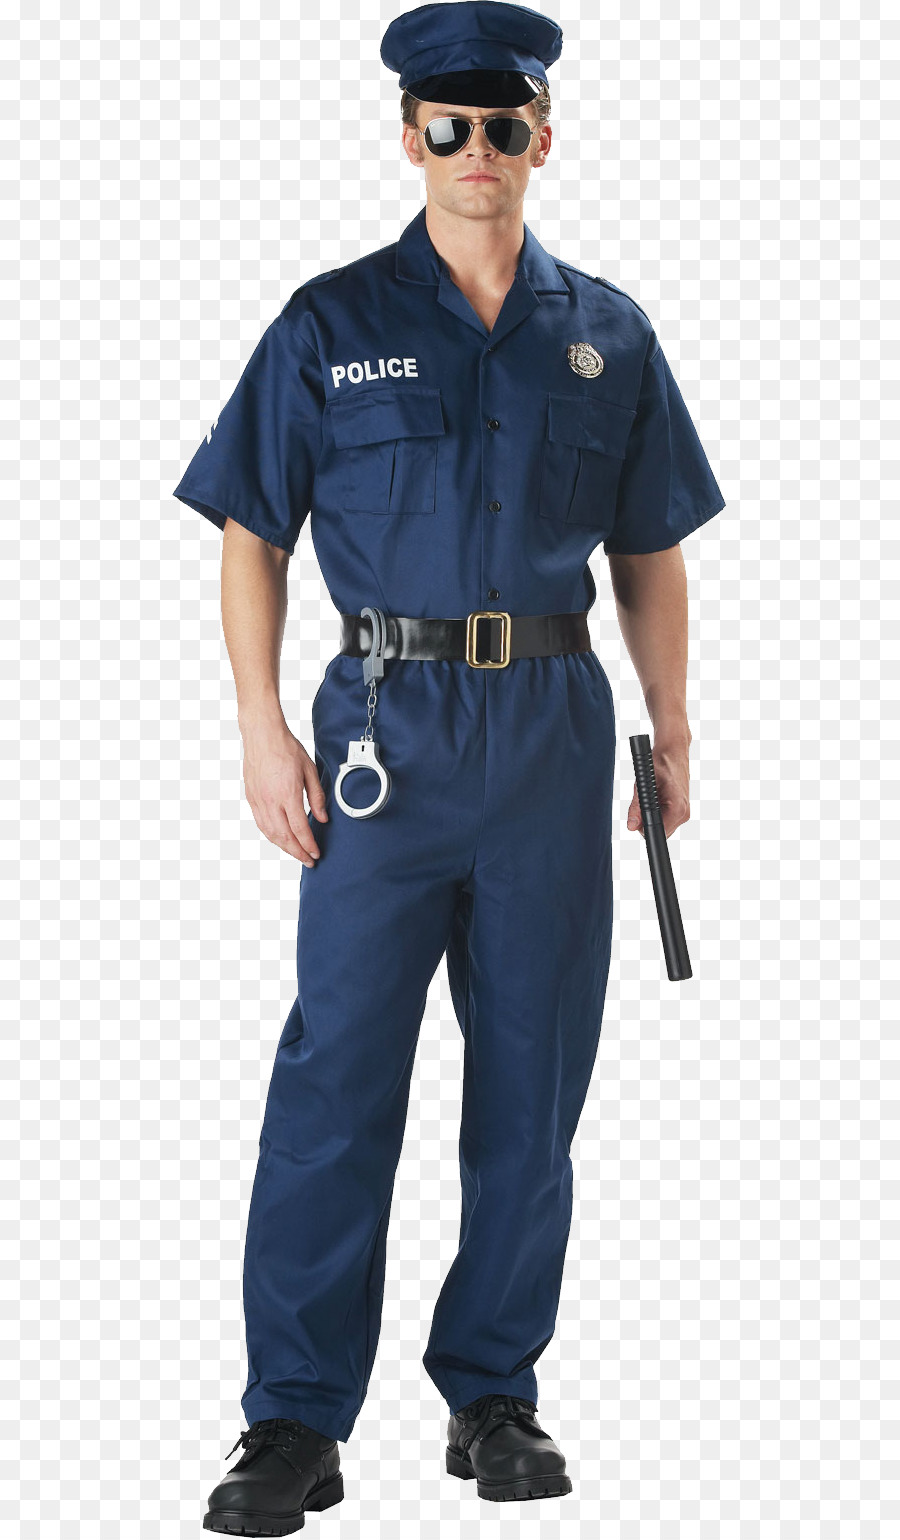 policeman clipart police costume